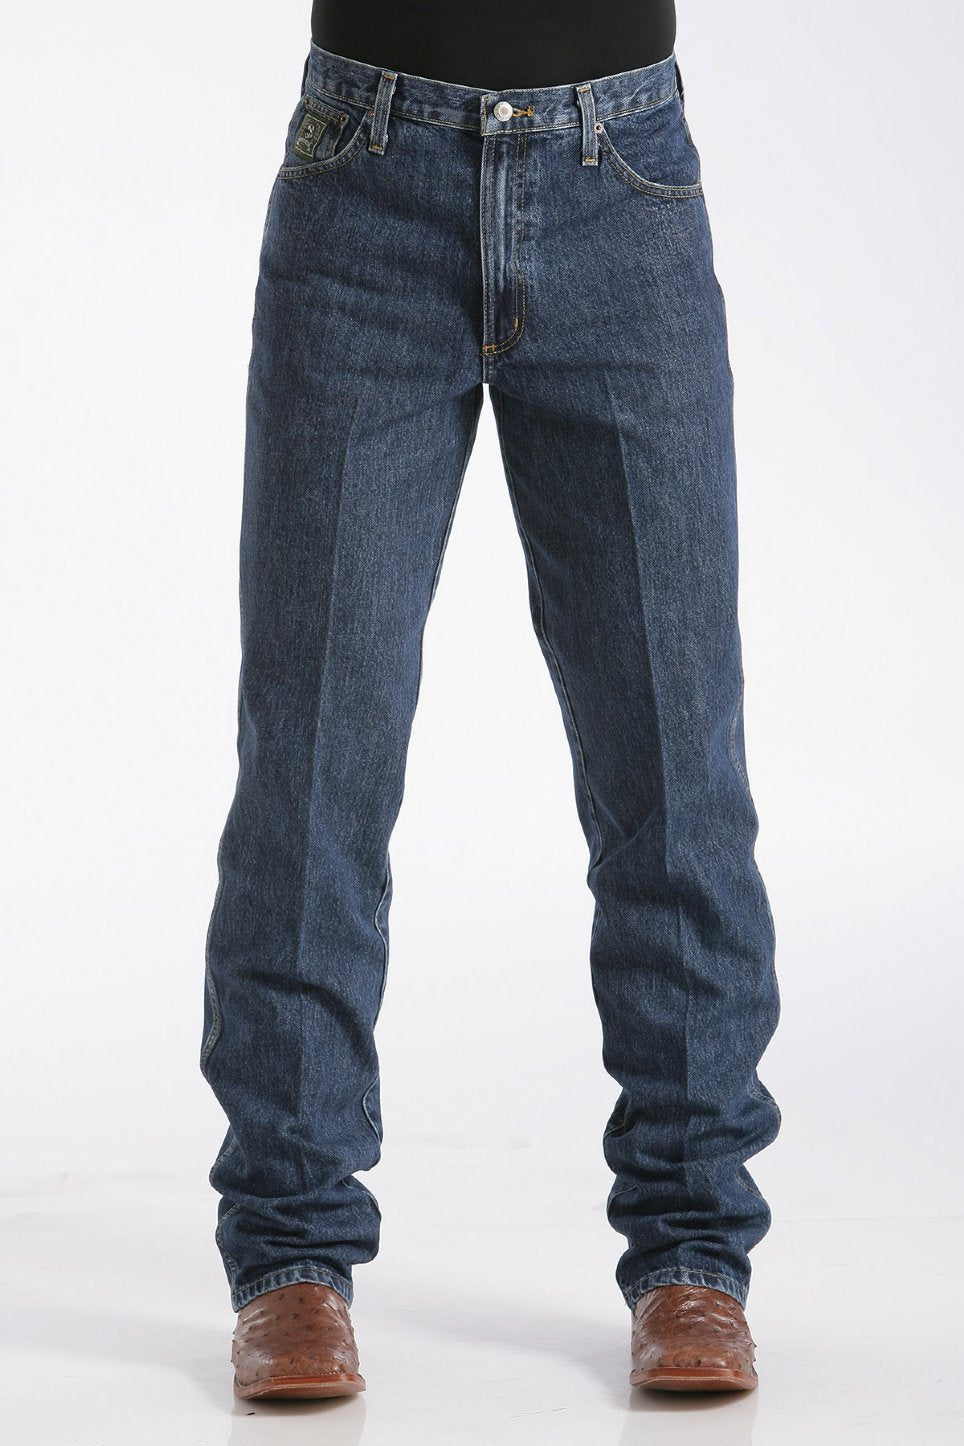 Cinch® Men's Green Label Relaxed Fit Denim Jeans